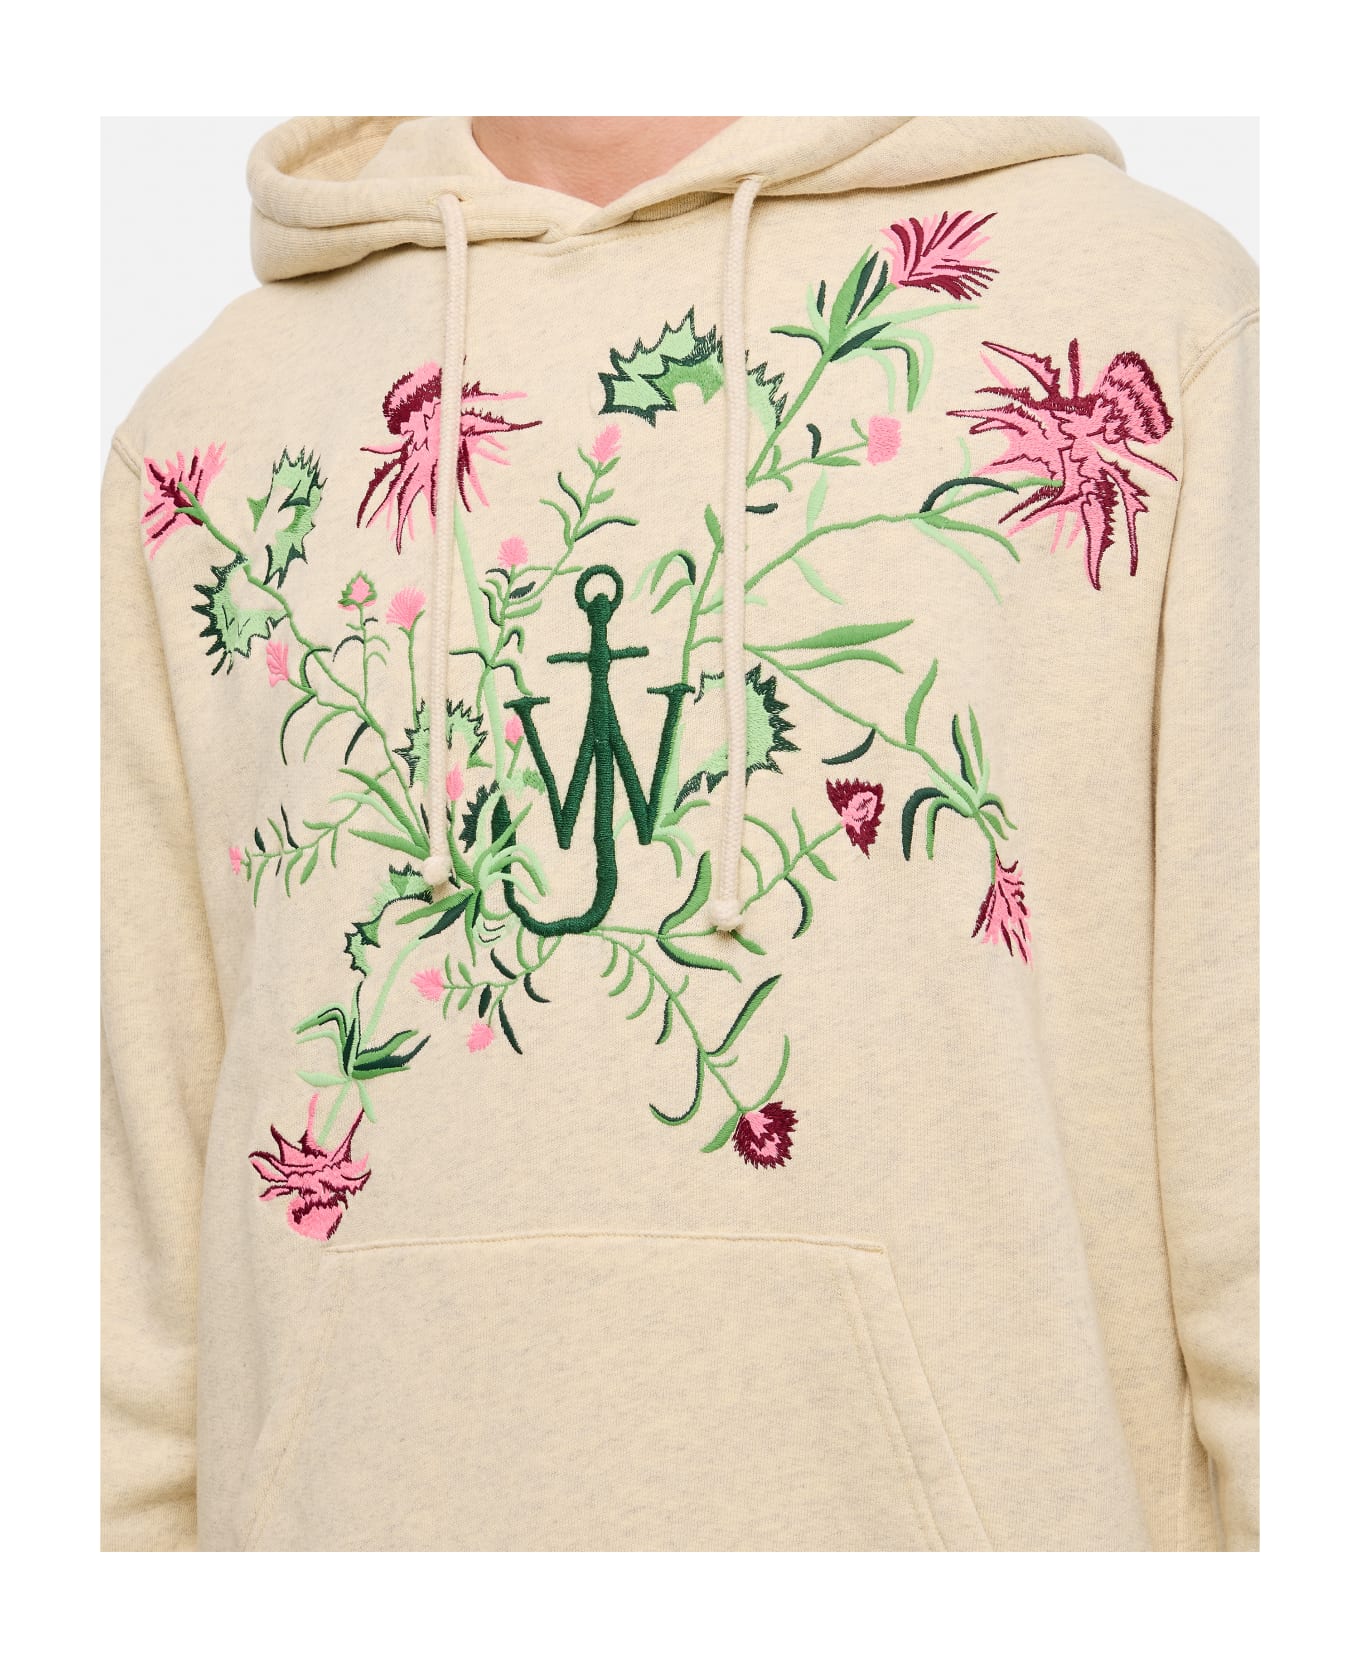 J.W. Anderson Pol Thistle Embroidery Hoodie - Beige